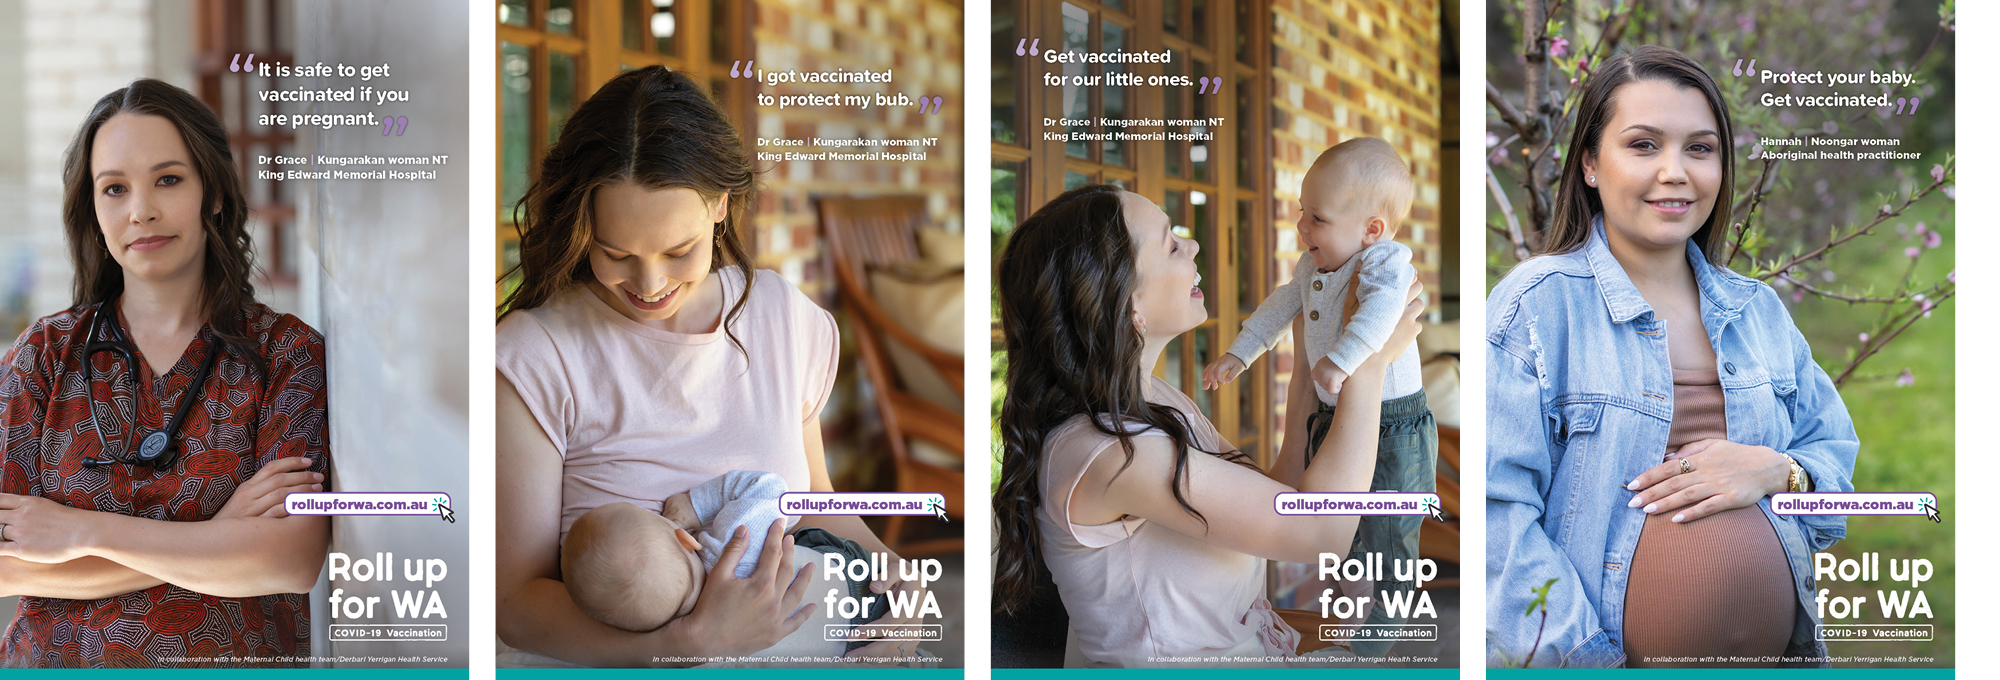 Preview image showing 4 poster styles available to download of pregnant or breasfeeding women